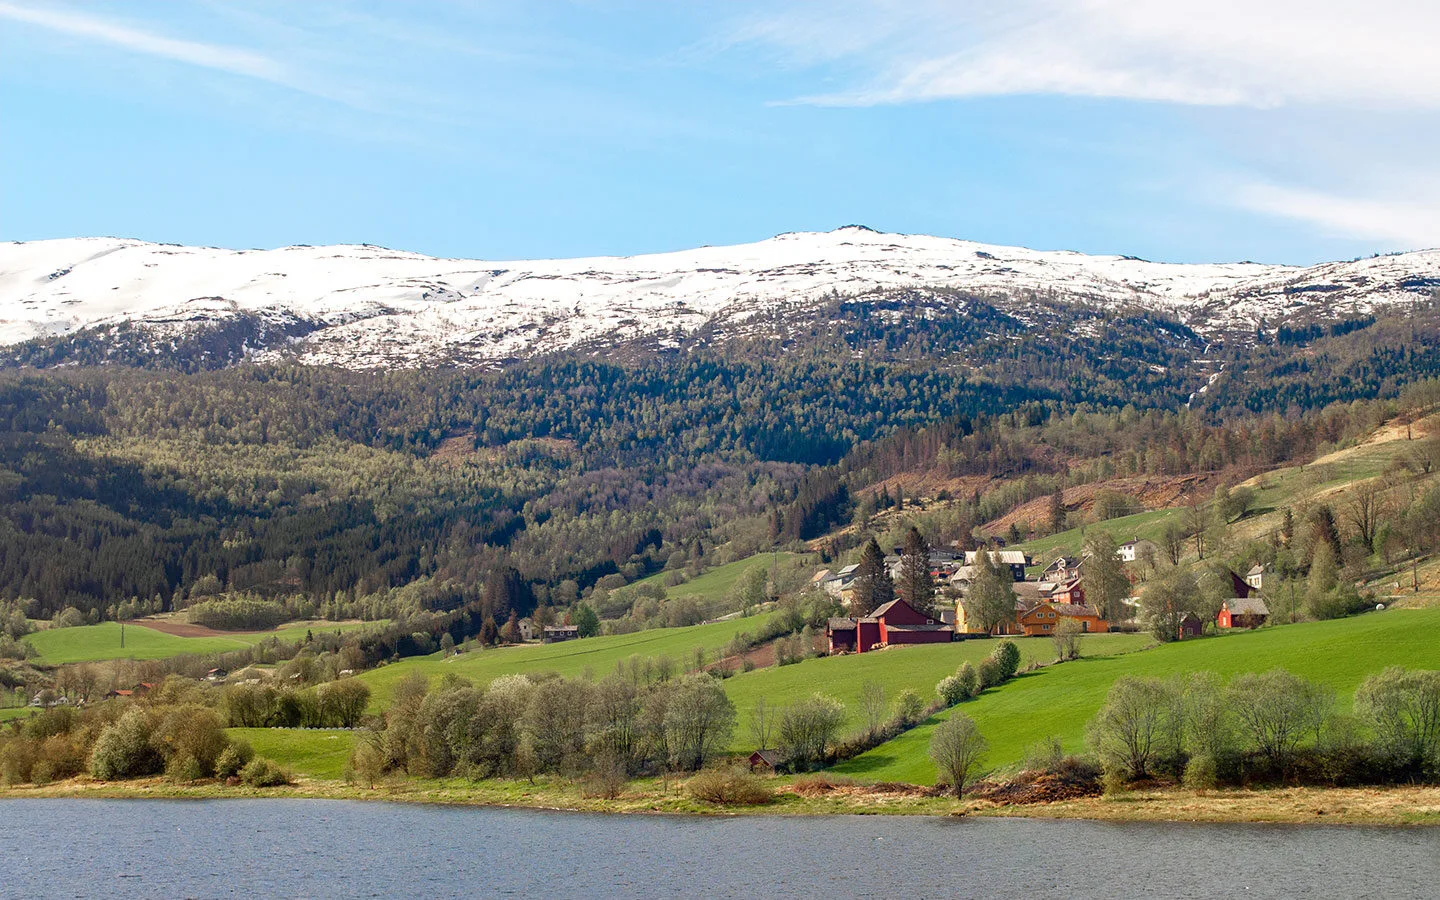 Scenic views along the train line from Bergen to Flam